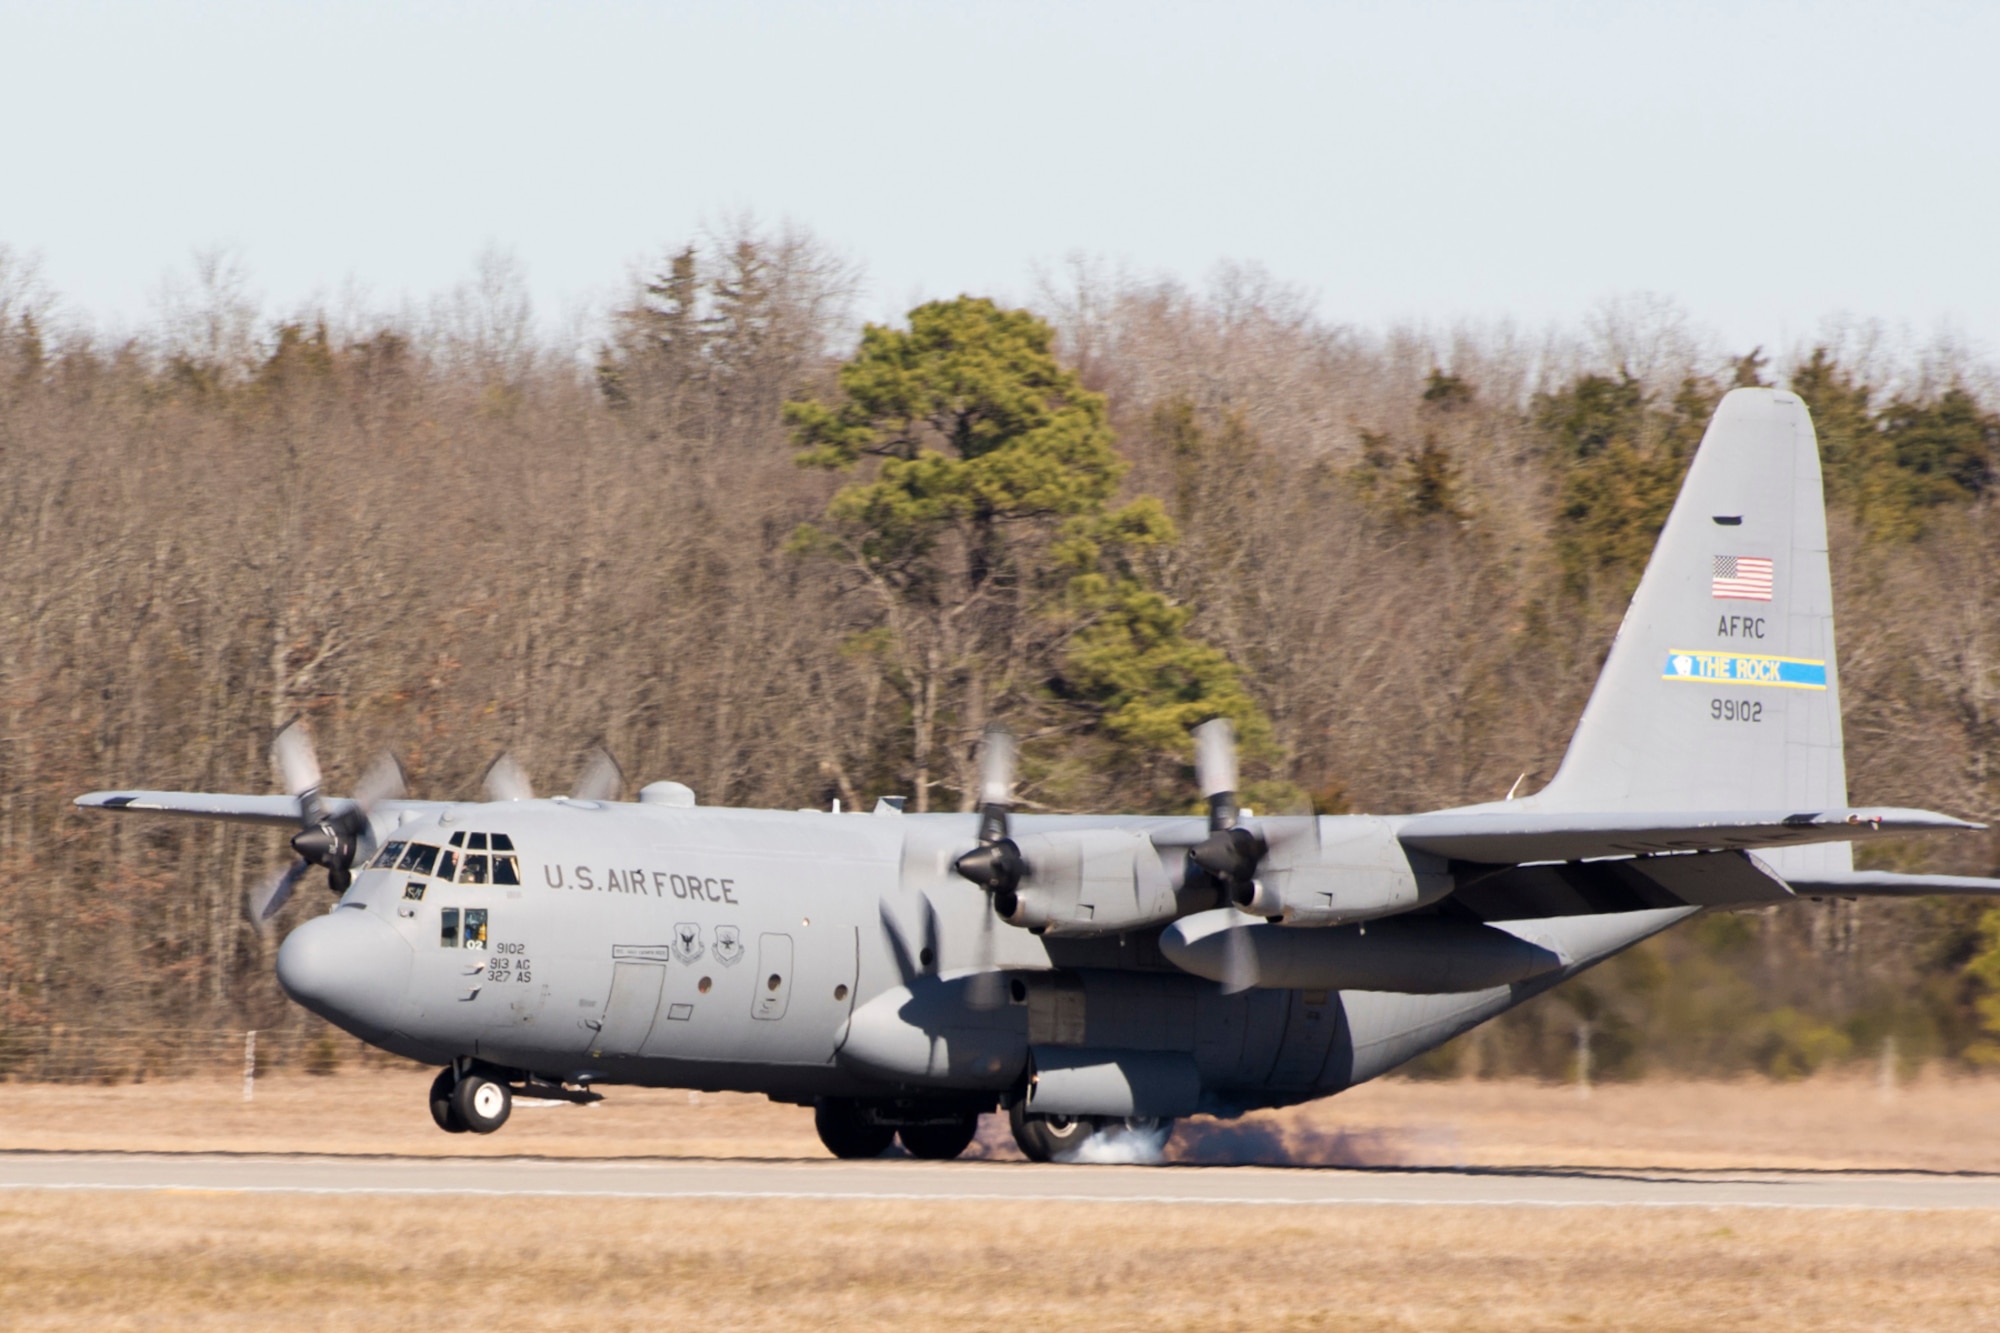 A U.S. Air Force Reserve C-130H Hercules assigned to the 913th Airlift Group, touches down on the runway at Little Rock Air Force Base after its final mission for the unit Jan. 28, 2016. The aircraft is one of the last two that will be moved to a new locations soon, as part of the group’s transition from the “H” model to the “J” model. (U.S. Air Force photo by Master Sgt. Jeff Walston/Released)